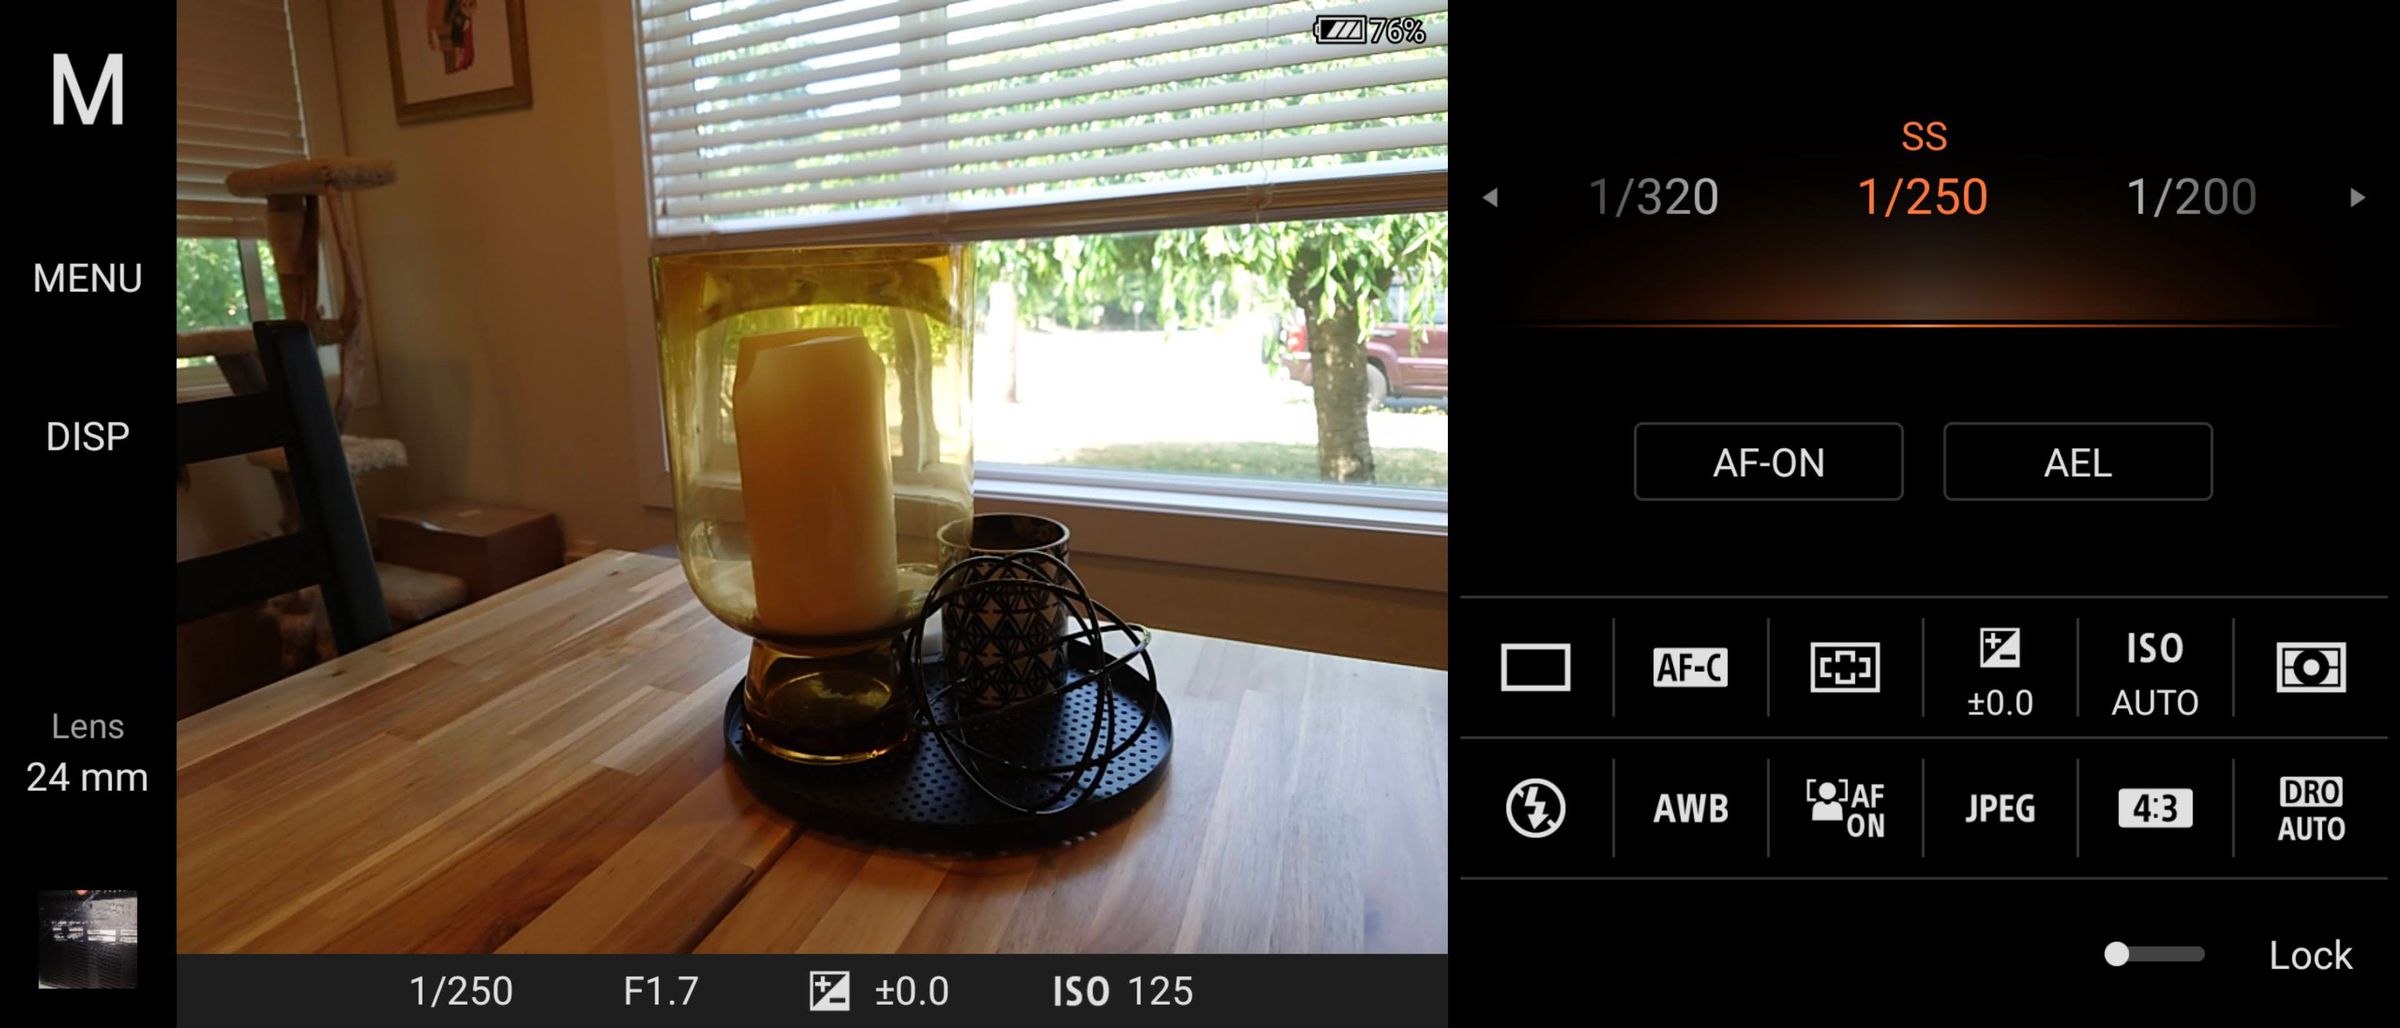 Switching to manual mode in the camera app brings up an Alpha-camera-esque interface.